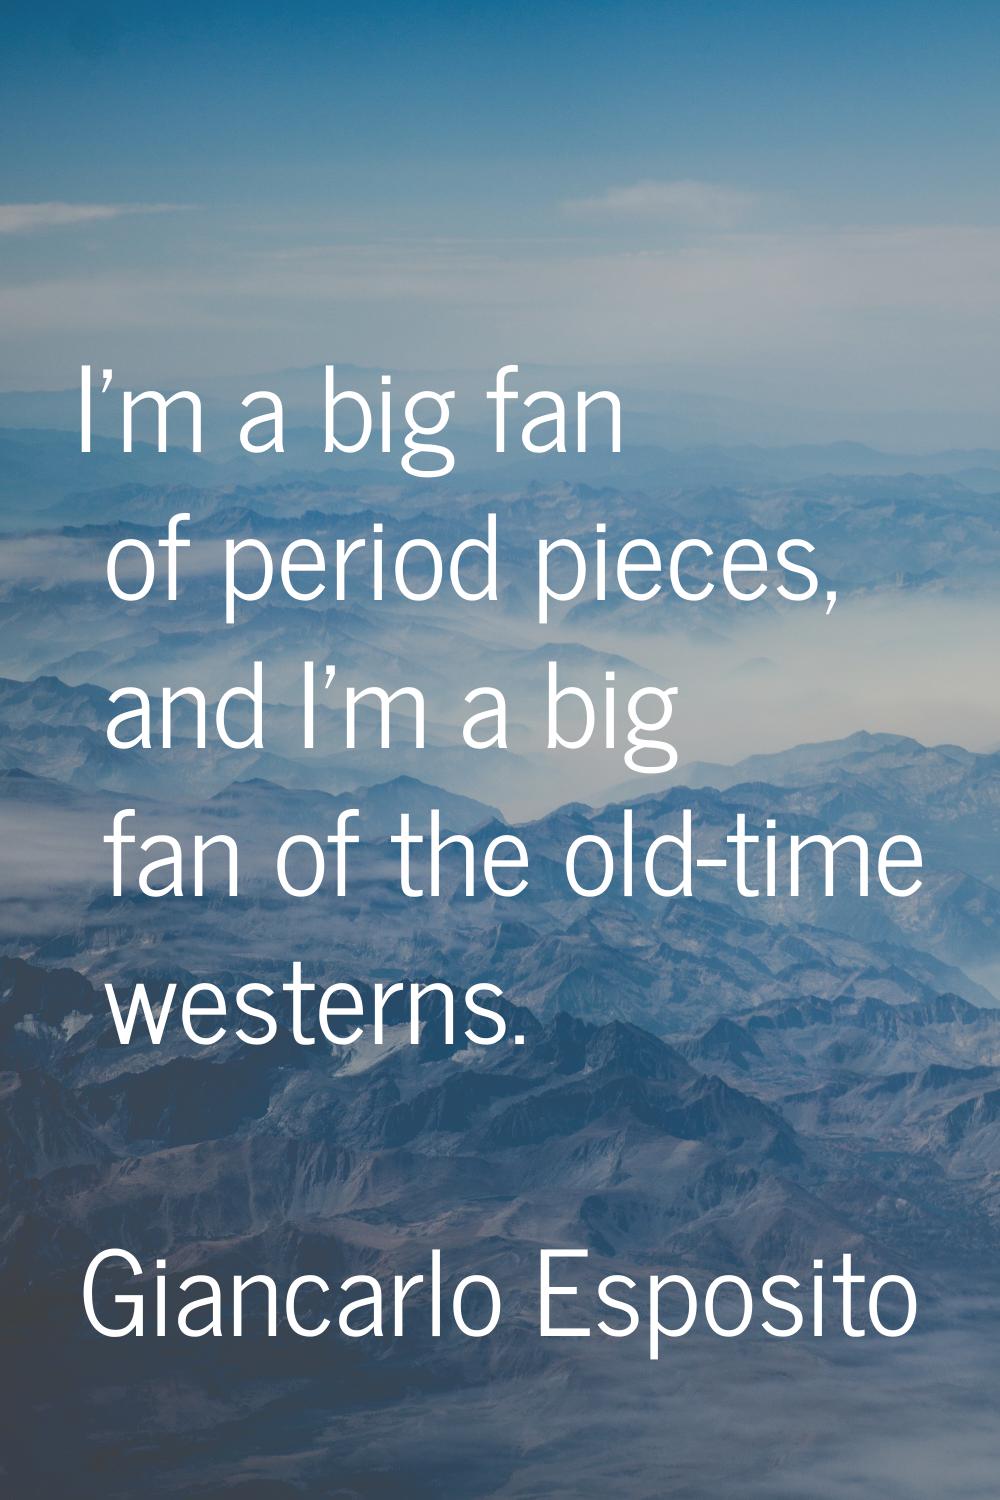 I'm a big fan of period pieces, and I'm a big fan of the old-time westerns.